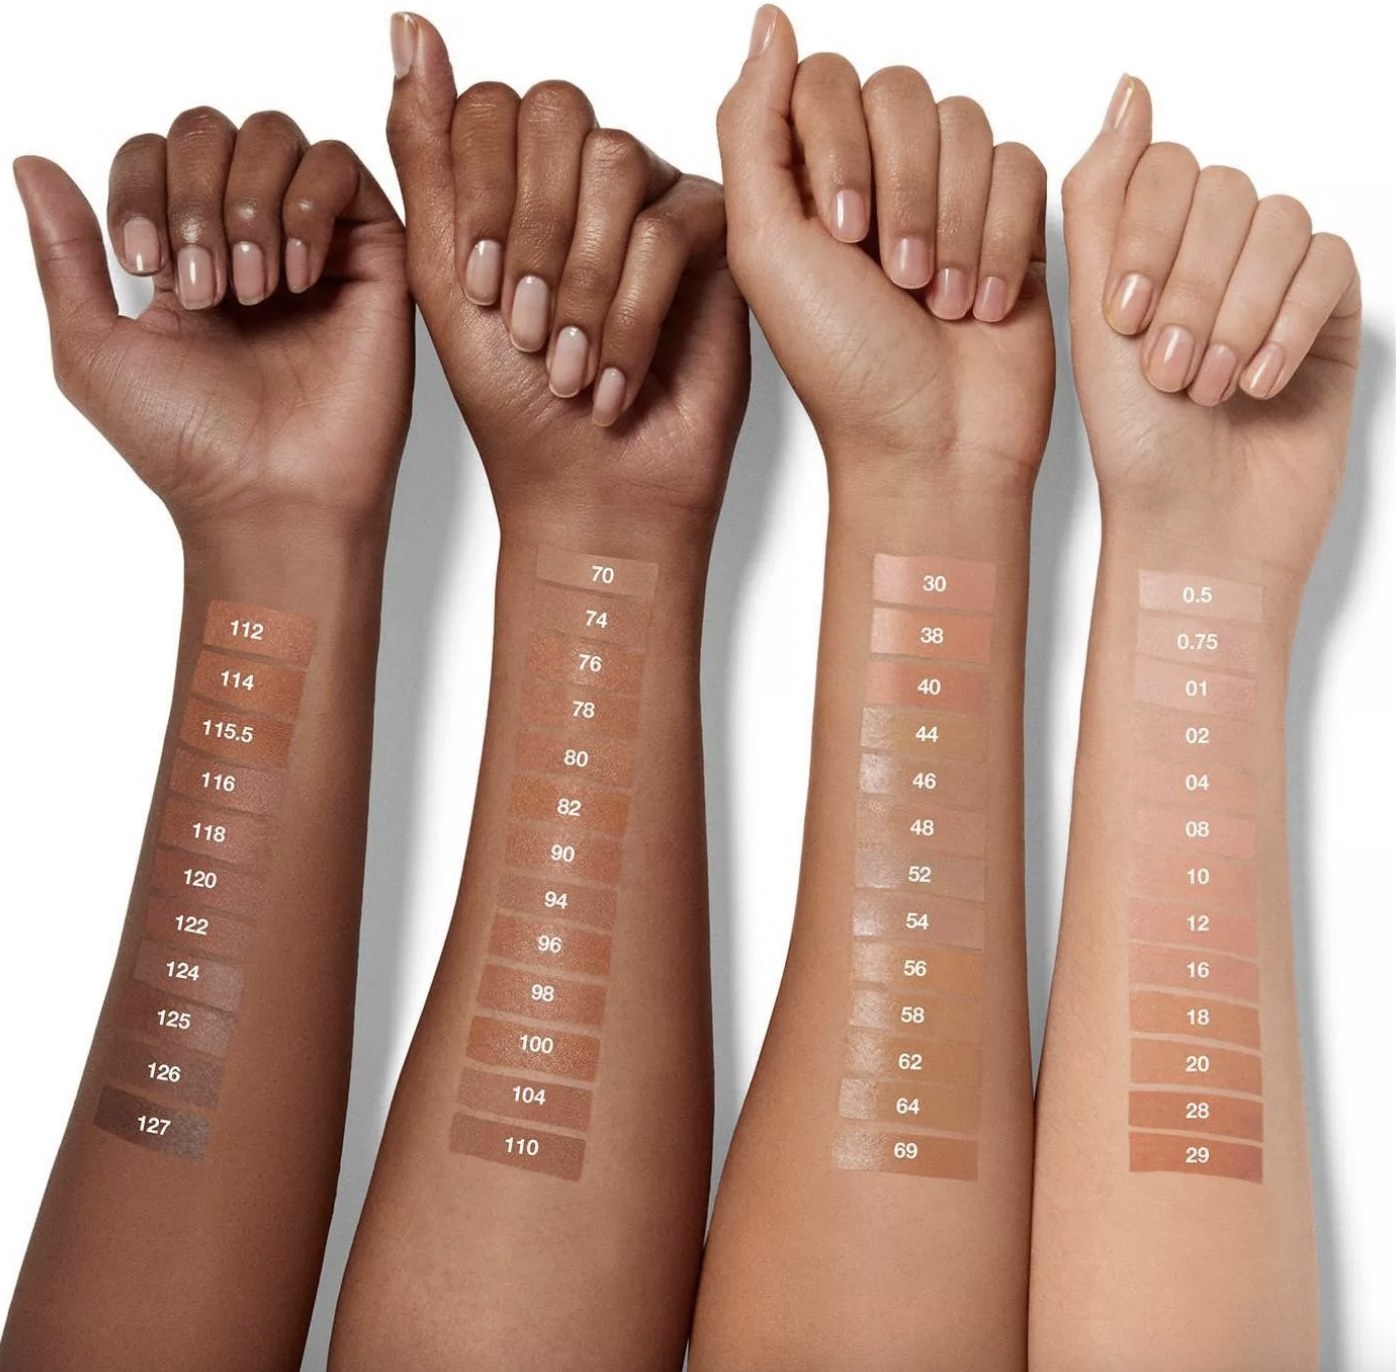 A set of four arms with foundation swatches